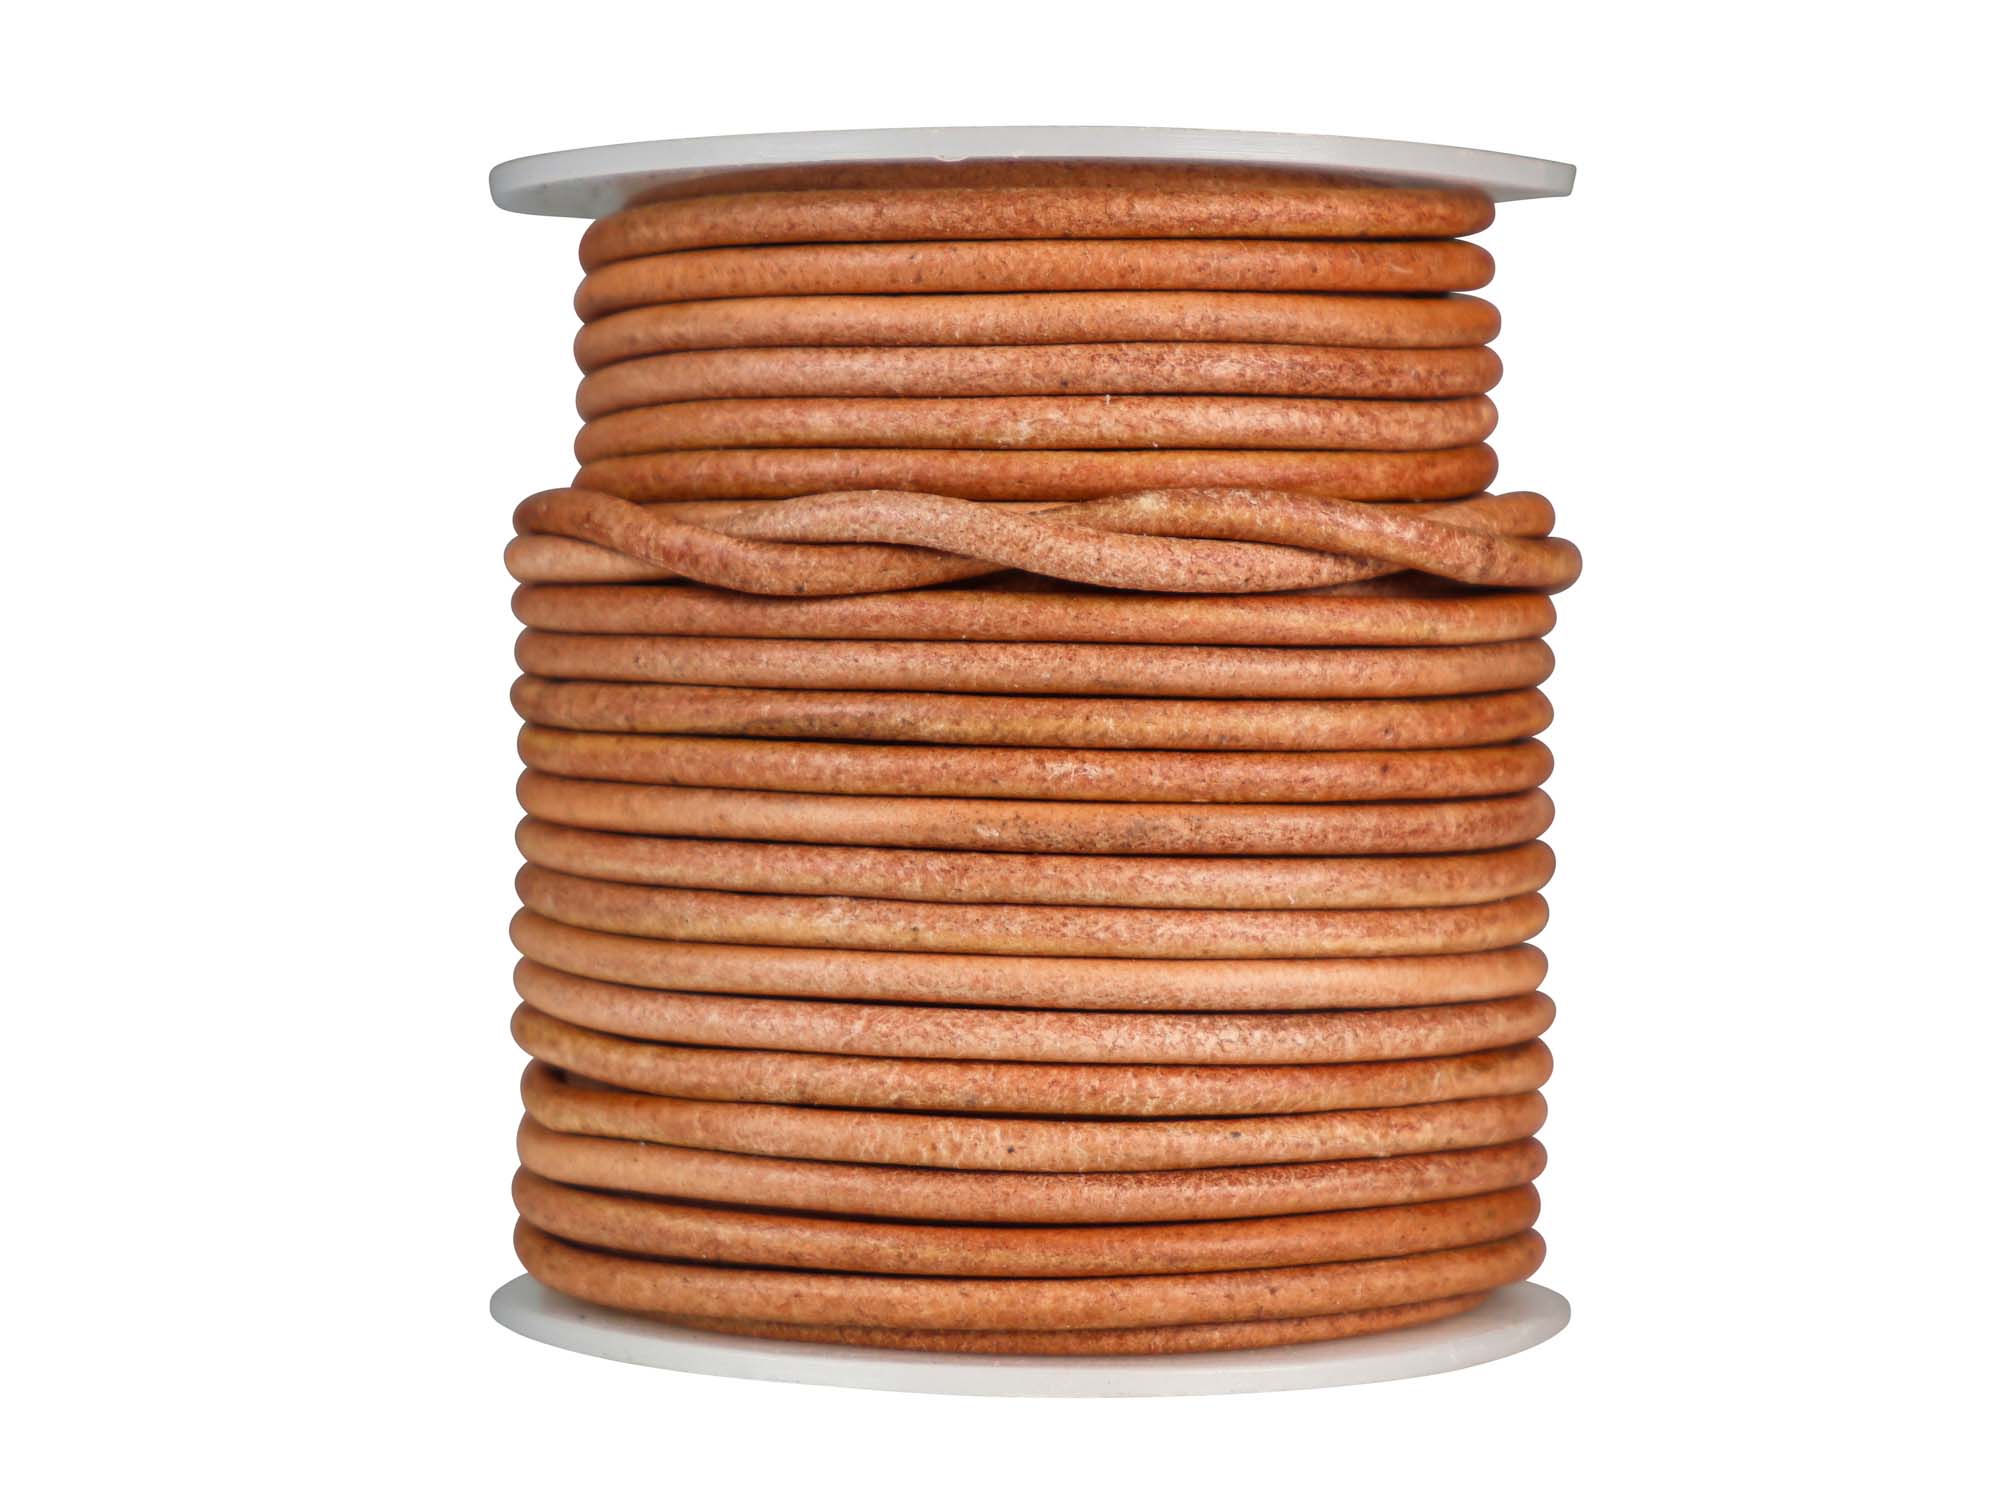 Leather Cord 3mm x 25m: Natural 